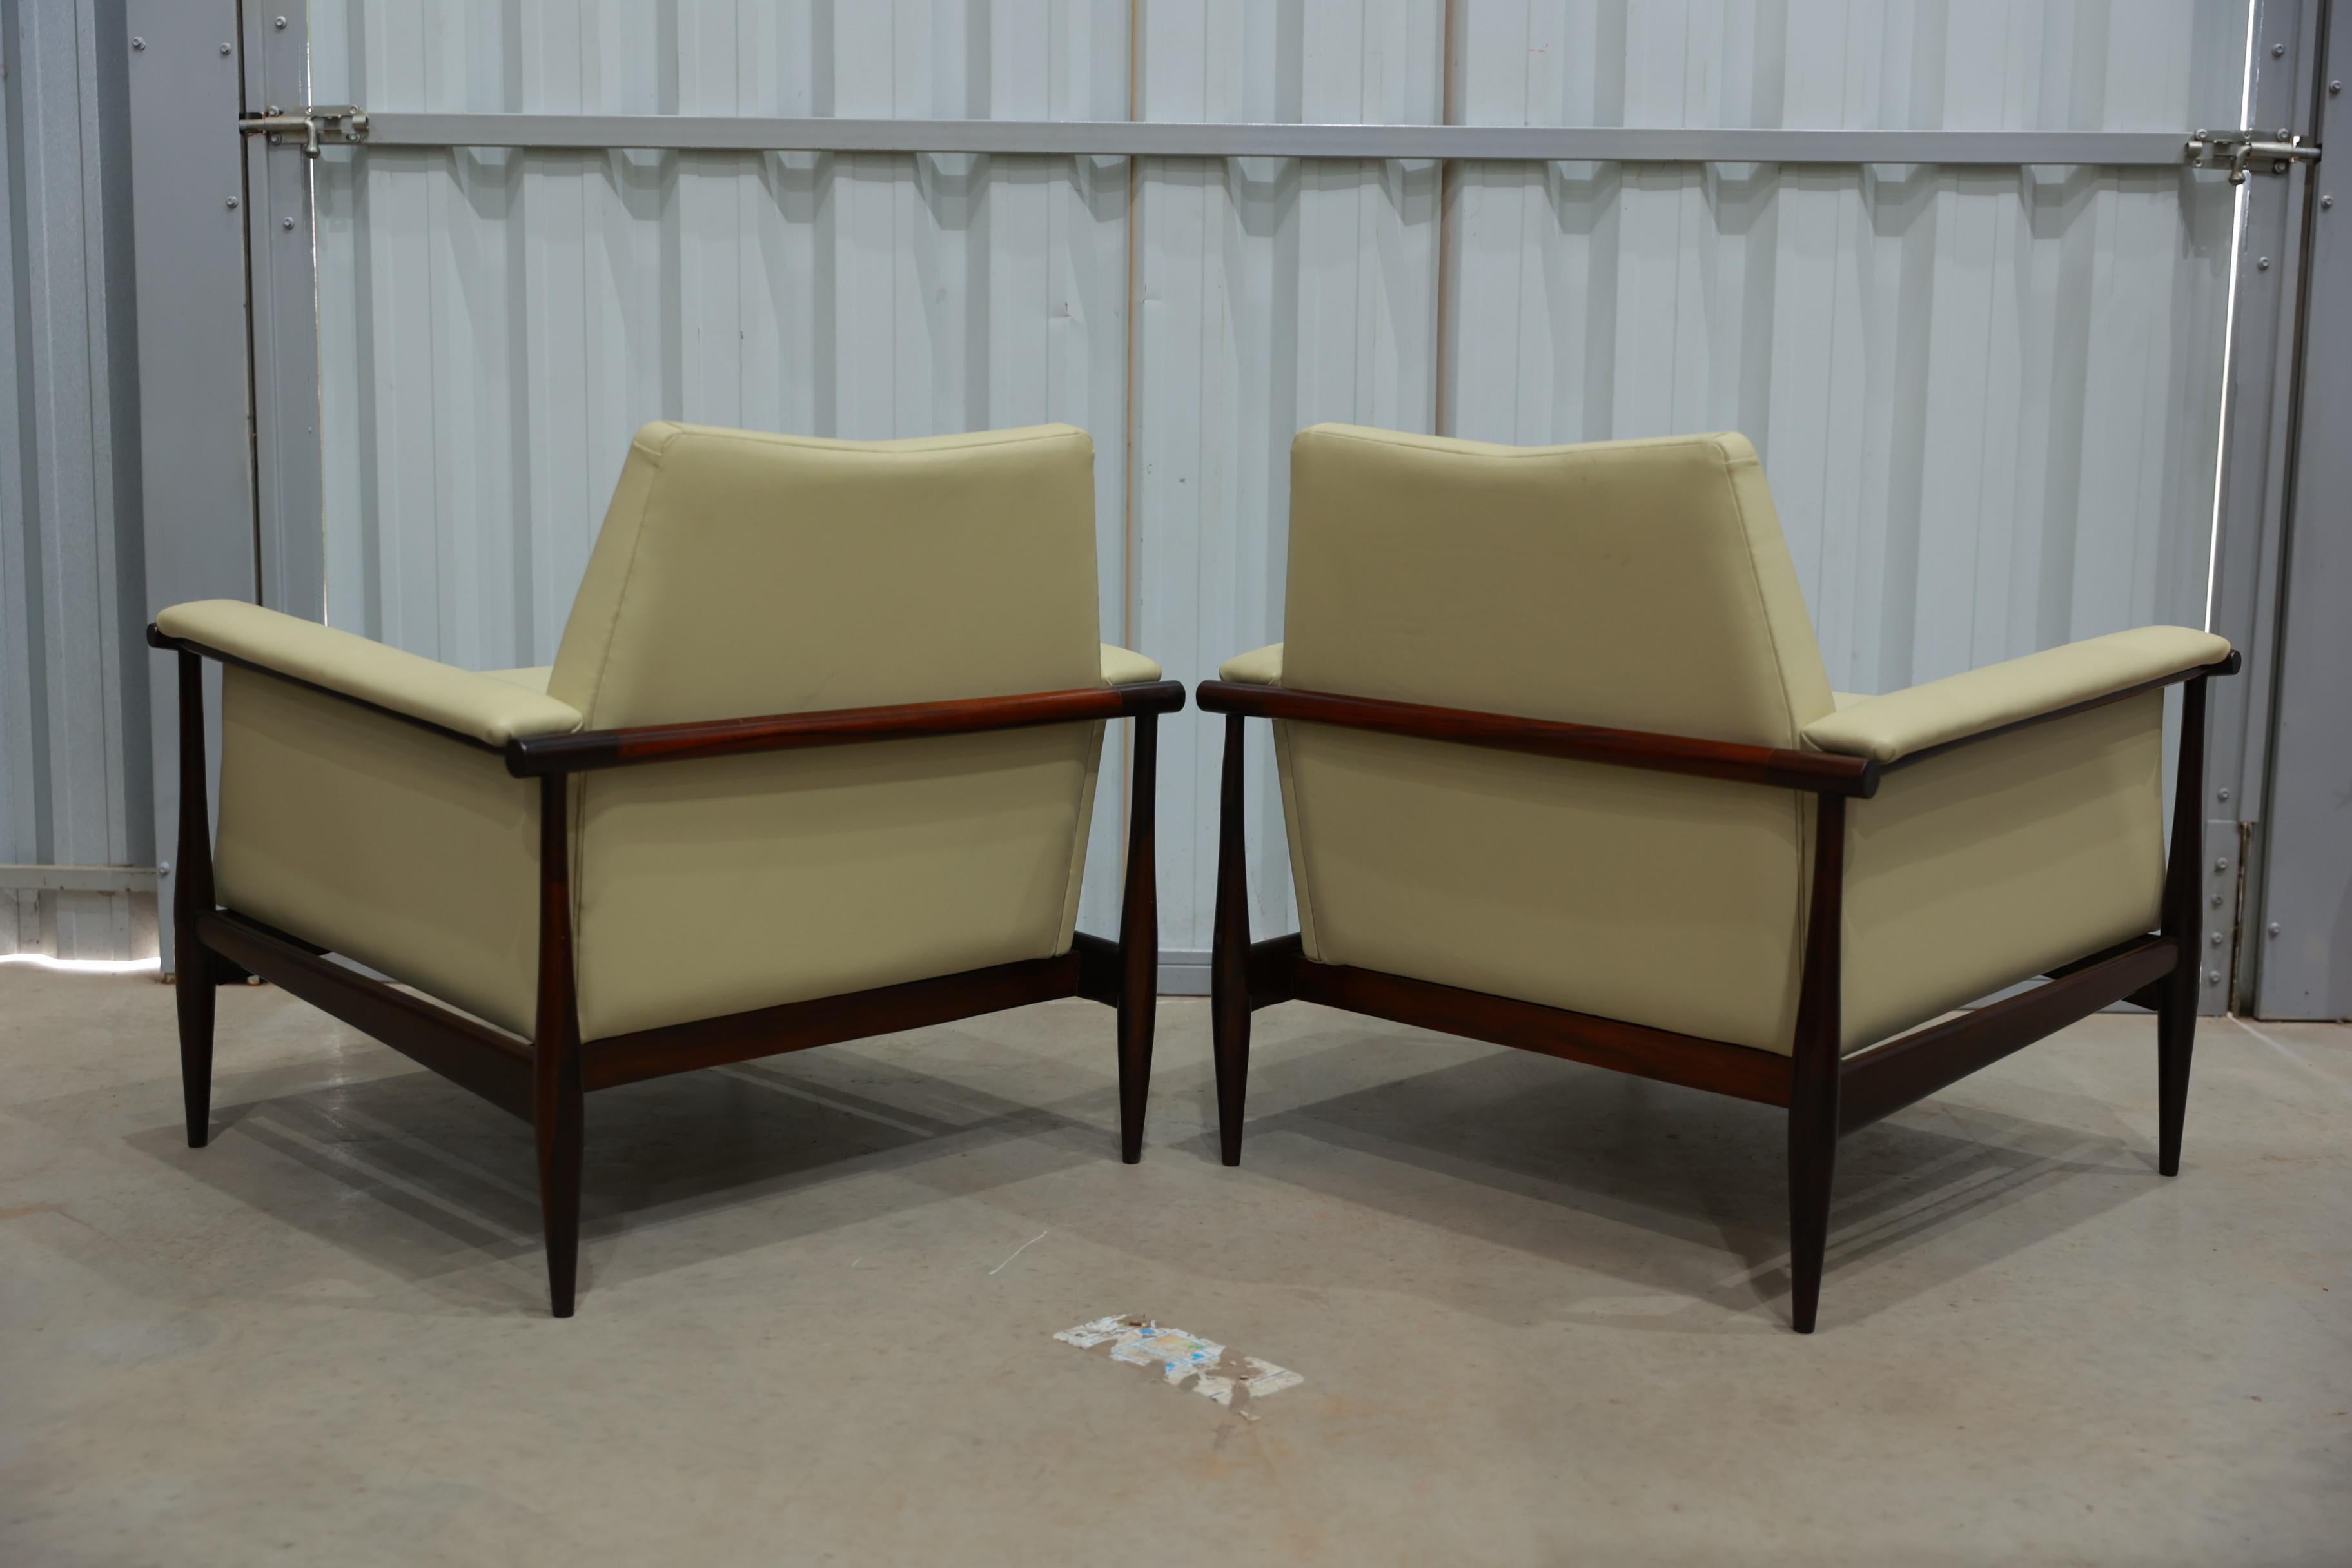 Caning Brazilian Modern Armchairs in Hardwood & Leather, Liceu de Artes, Brazil, 1960s For Sale